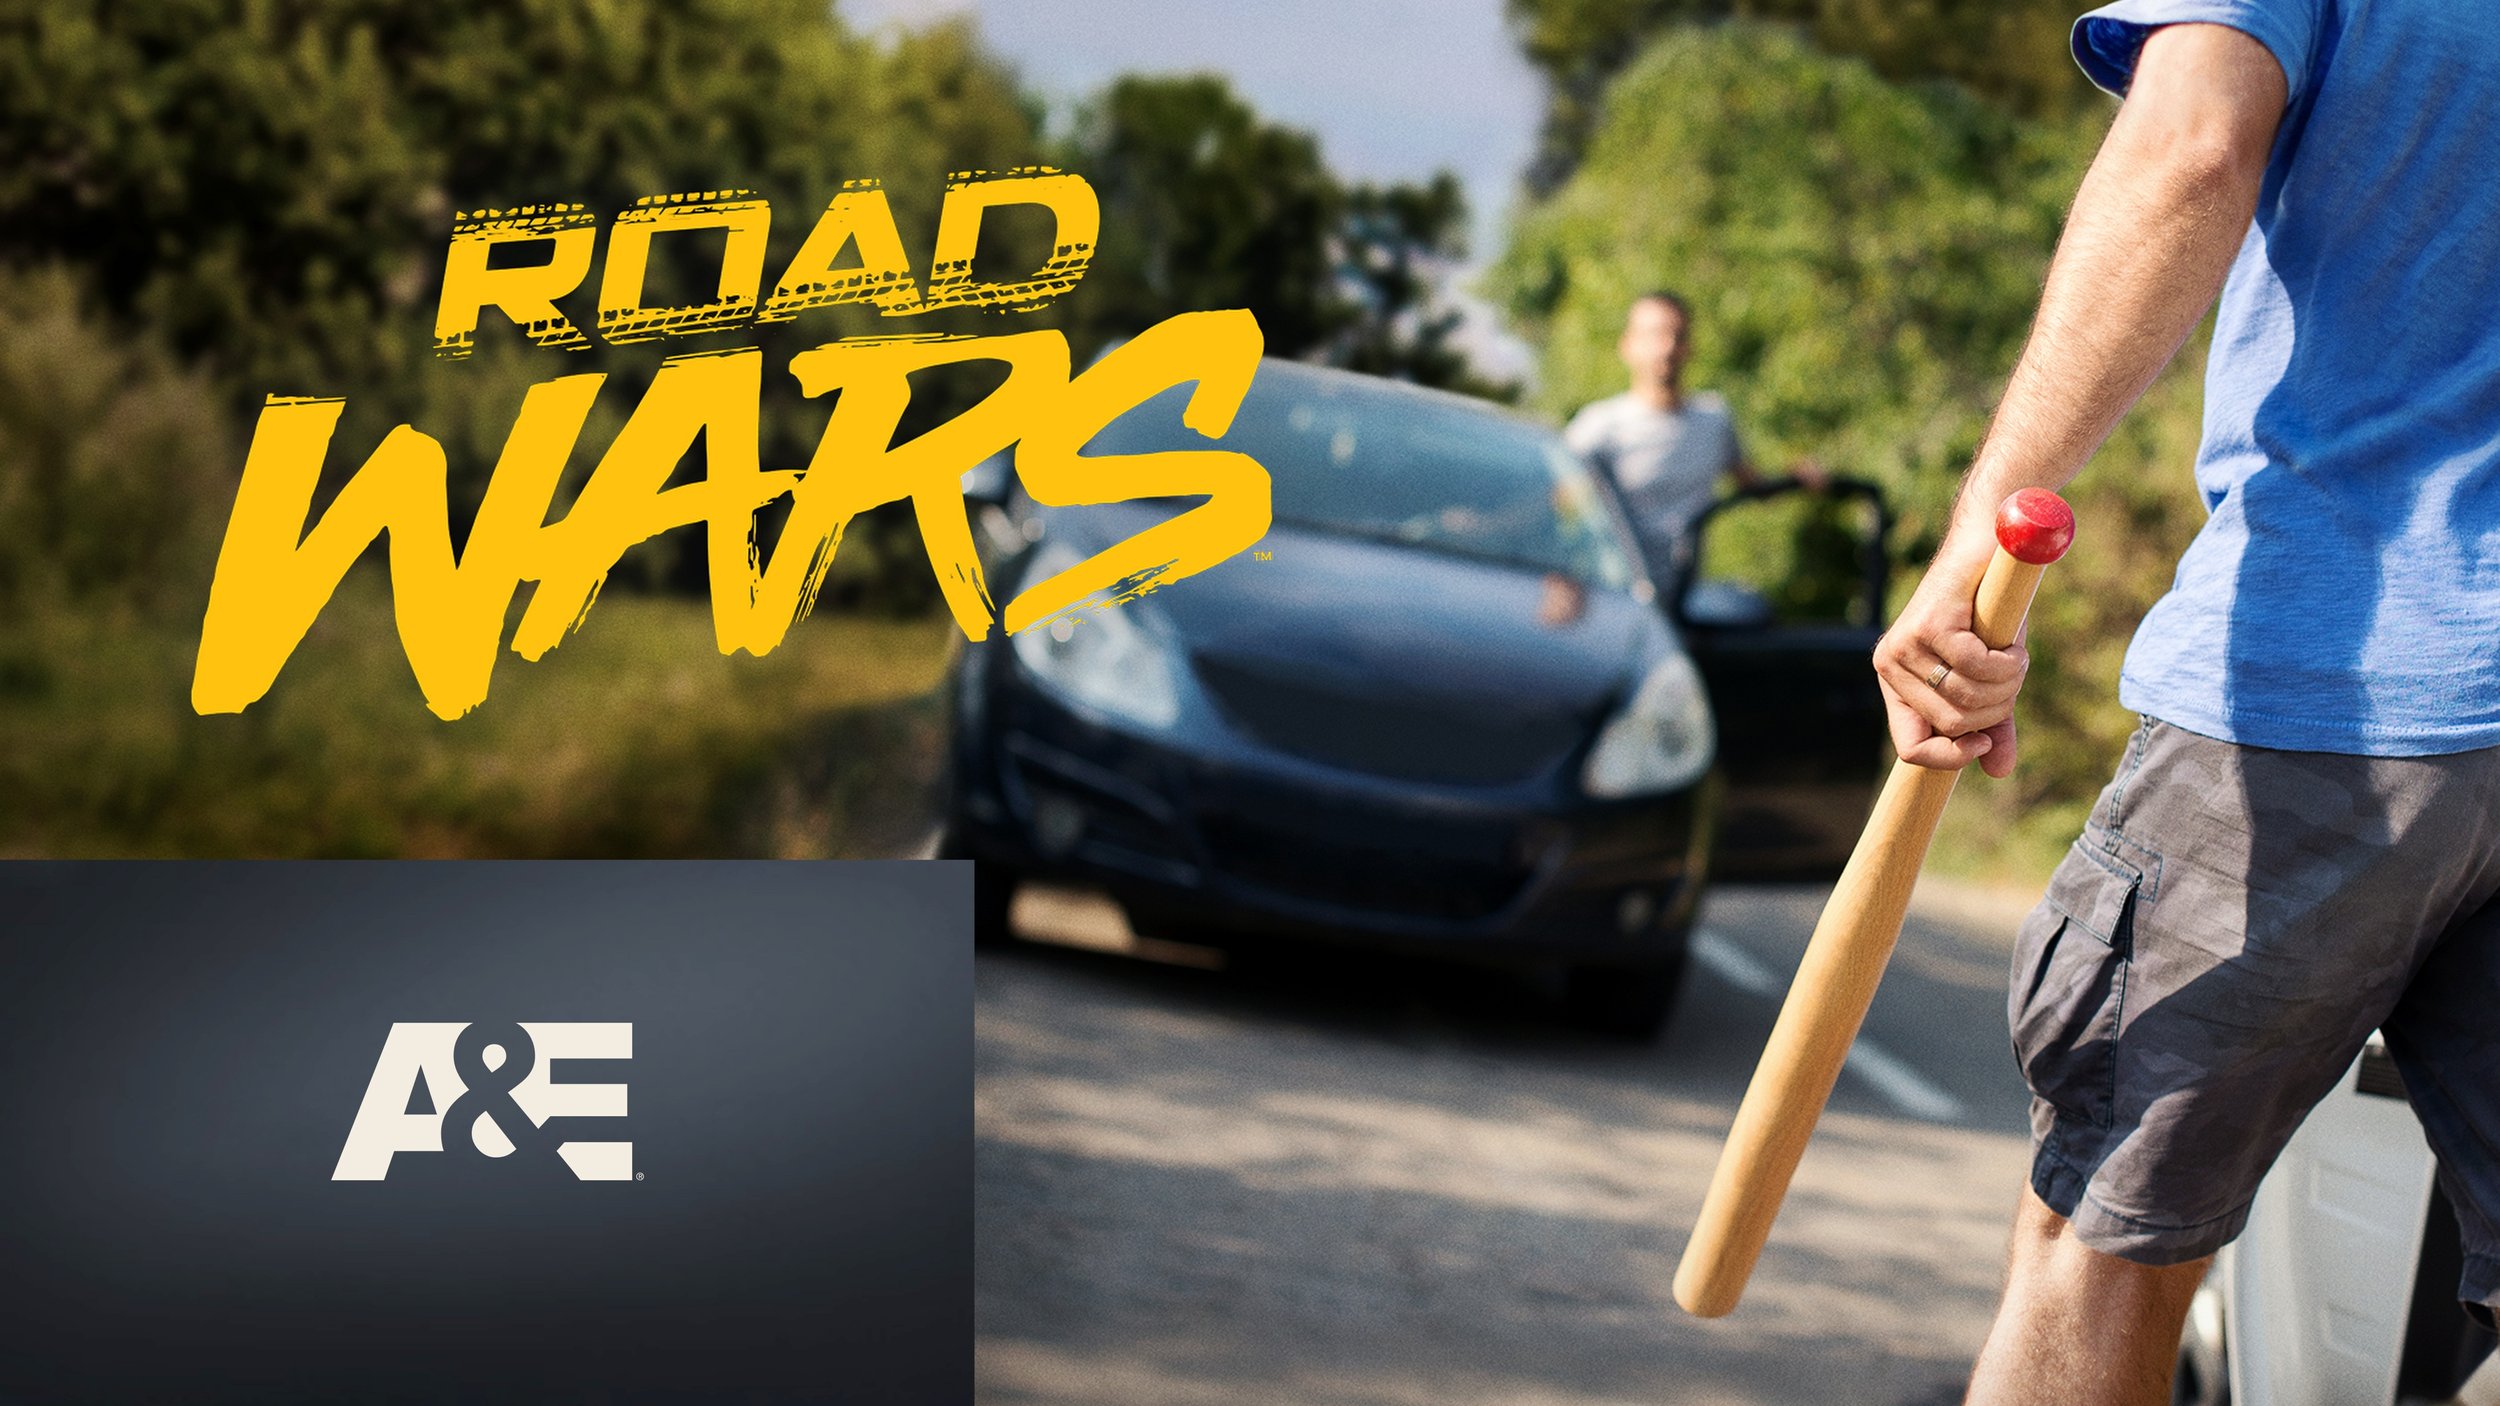 Road Wars with A&E_2.1.1.jpg